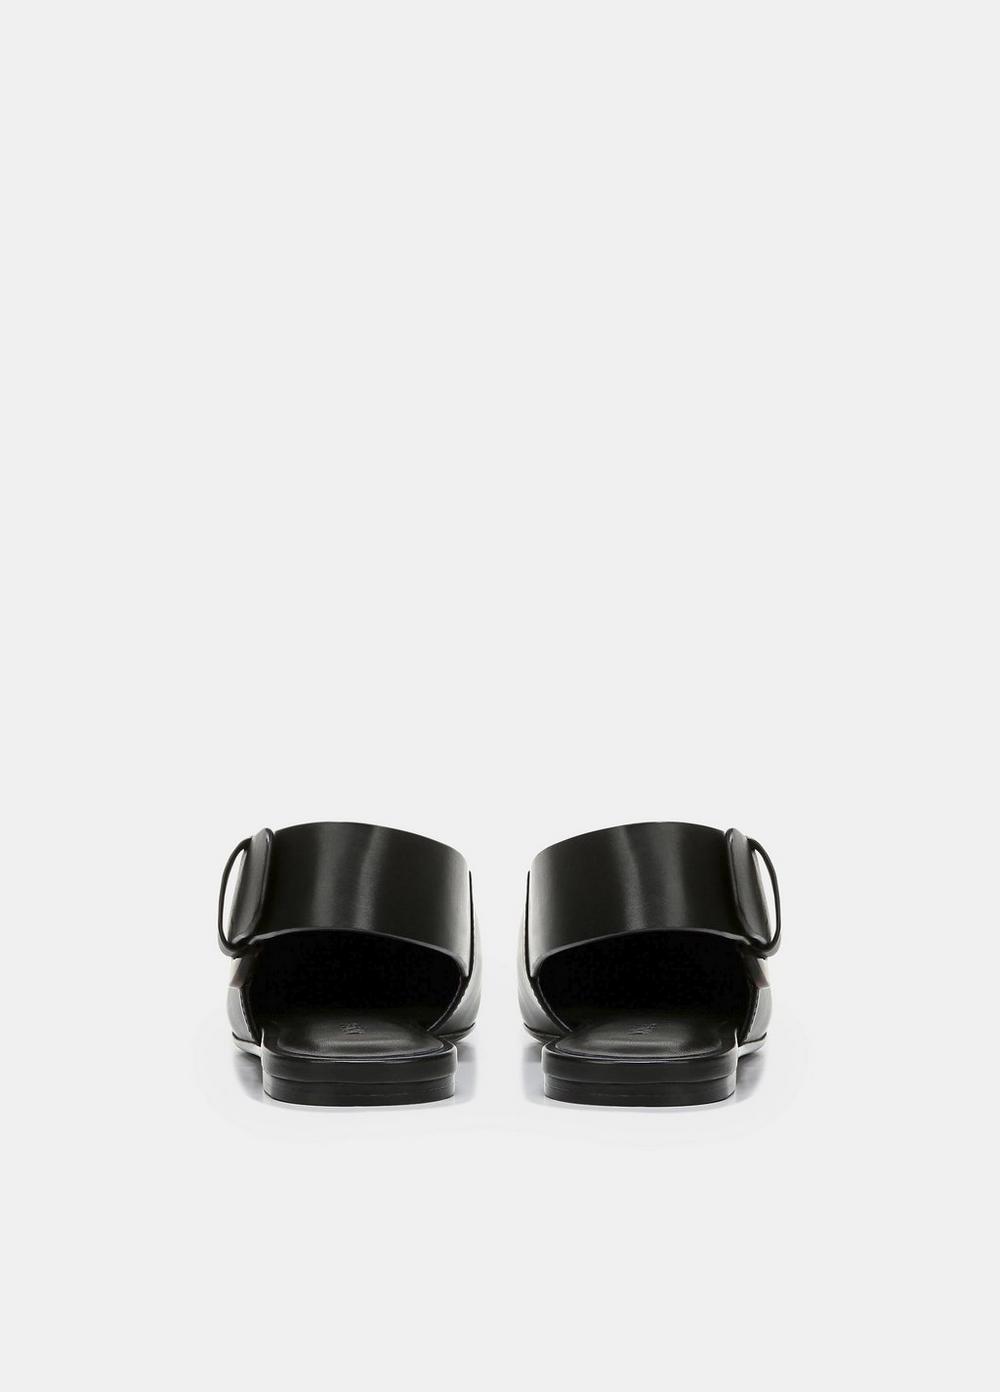 Leather Cadot Buckle Shoe